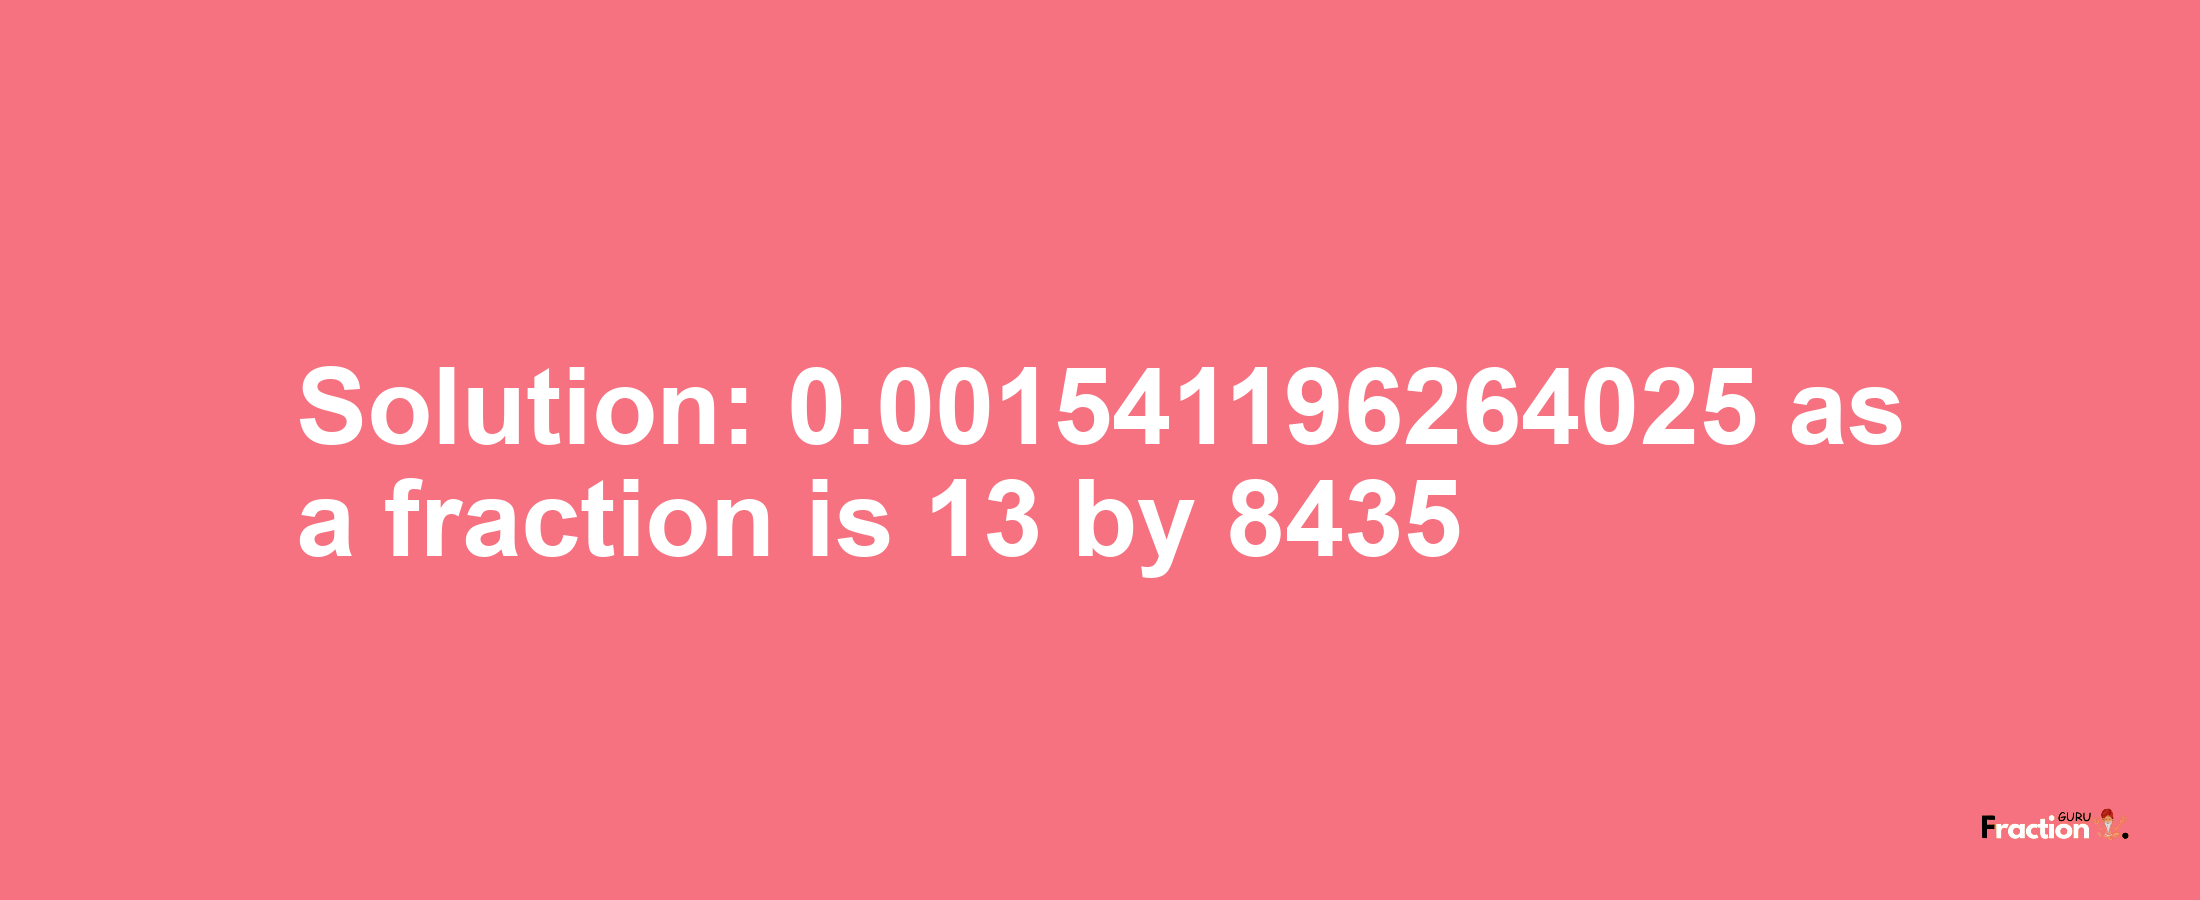 Solution:0.001541196264025 as a fraction is 13/8435